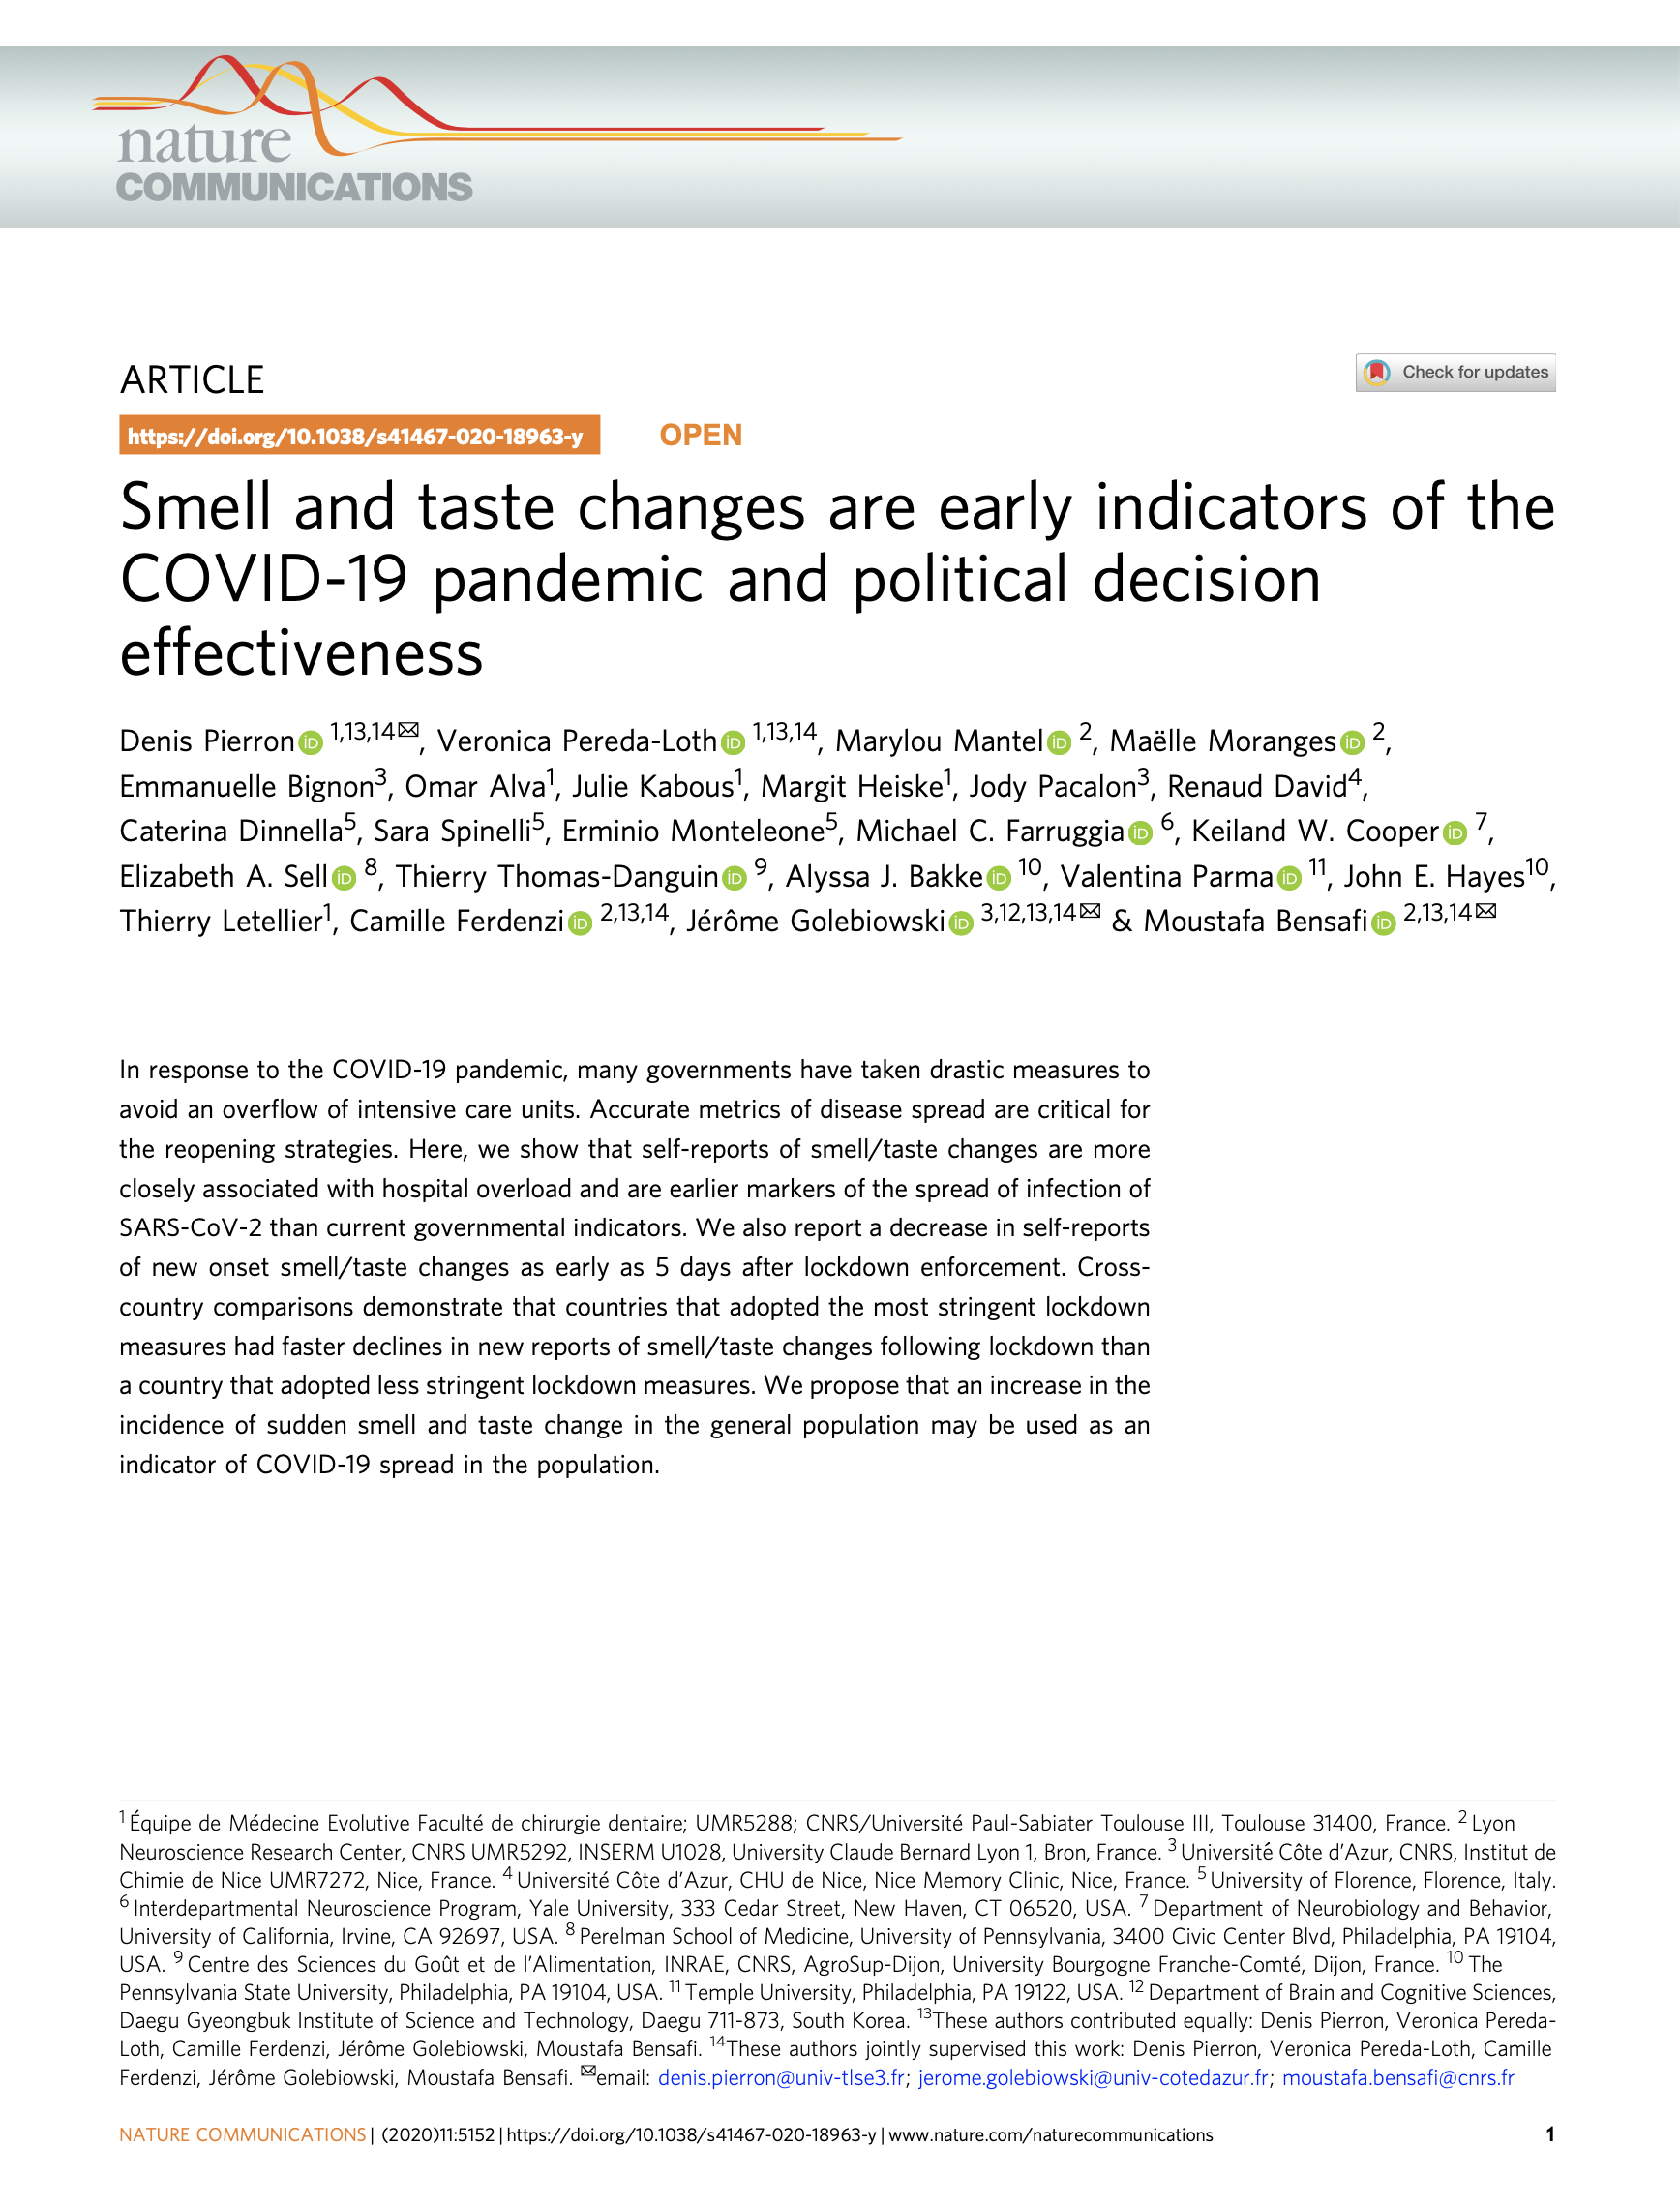 Smell and taste changes are early indicators of the COVID-19 pandemic and political decision effectiveness